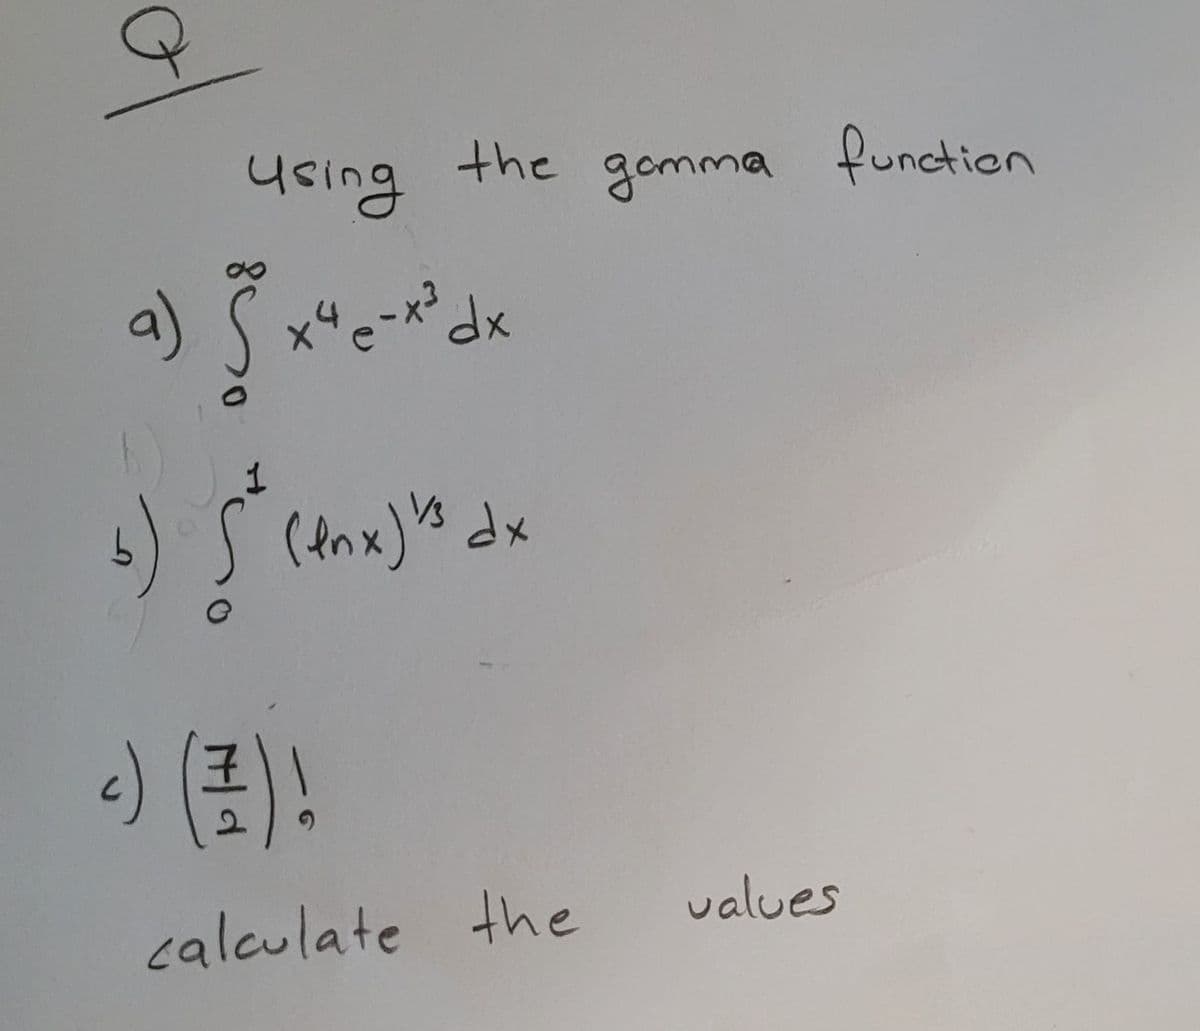 Q
using
a) 5²x²4 e-x²³ dx
6) [²*
Š
the
(en x) 's dx
-) () !
calculate the
gomma function
values